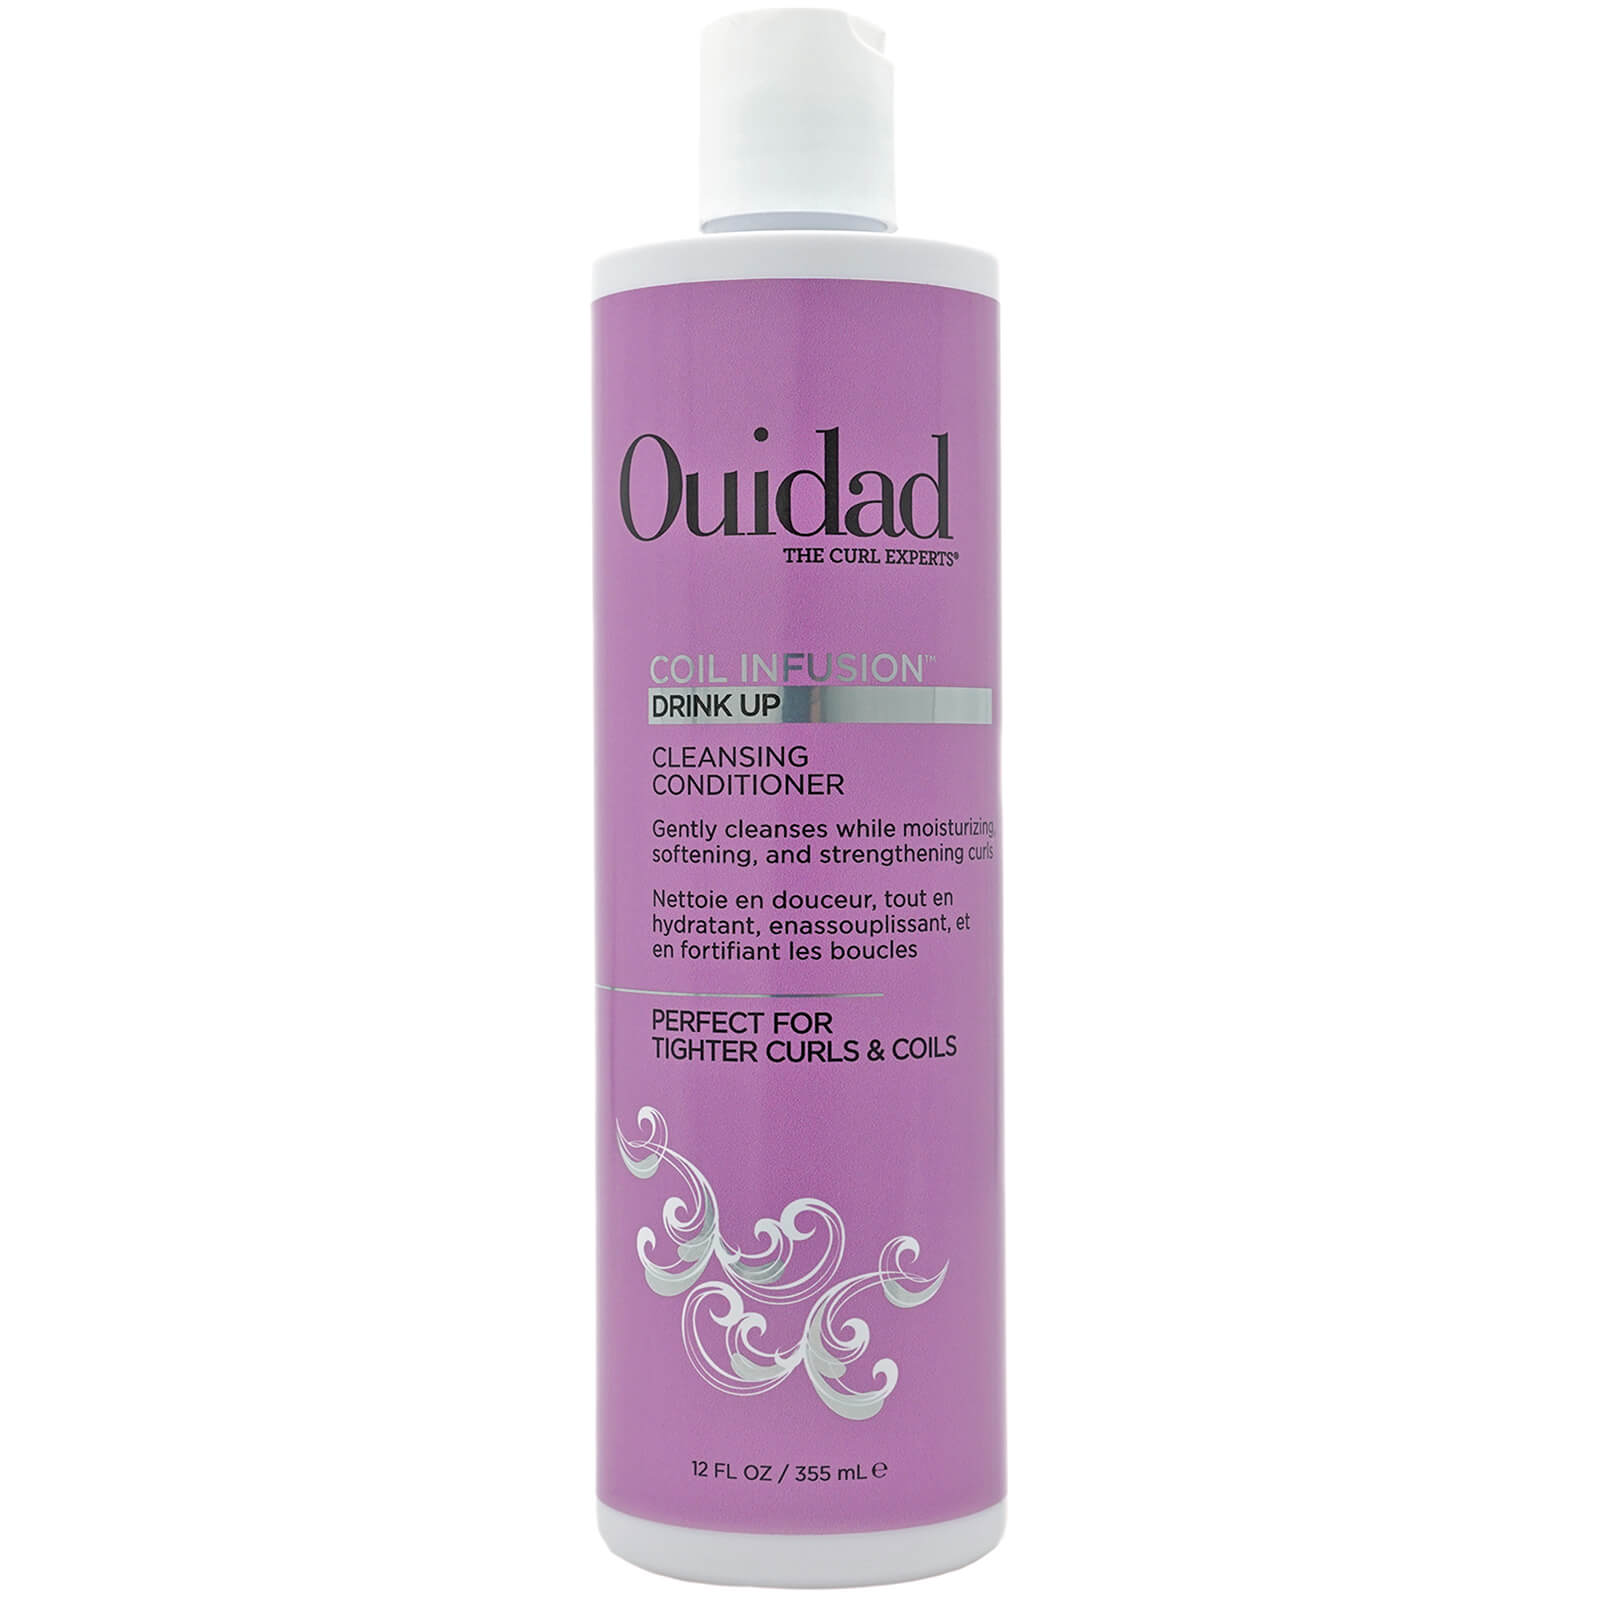 Ouidad Coil Infusion Drink Up Cleansing Conditioner 12 oz In White